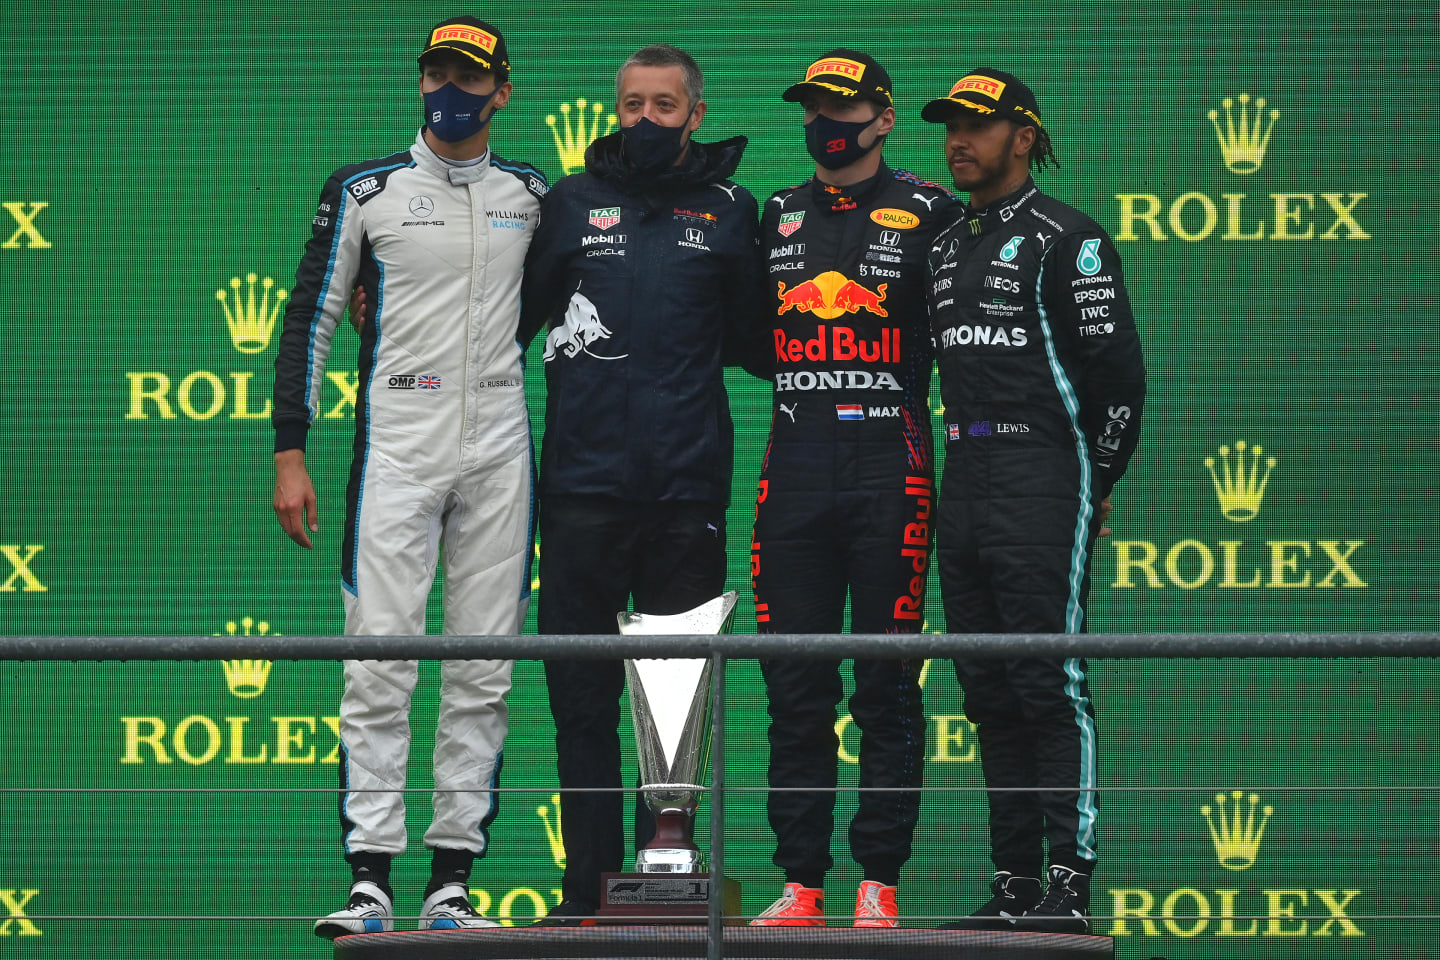 SPA, BELGIUM - AUGUST 29: Race winner Max Verstappen of Netherlands and Red Bull Racing, second placed George Russell of Great Britain and Williams and third placed Lewis Hamilton of Great Britain and Mercedes GP celebrate on the podium during the F1 Grand Prix of Belgium at Circuit de Spa-Francorchamps on August 29, 2021 in Spa, Belgium. (Photo by Dan Mullan/Getty Images)